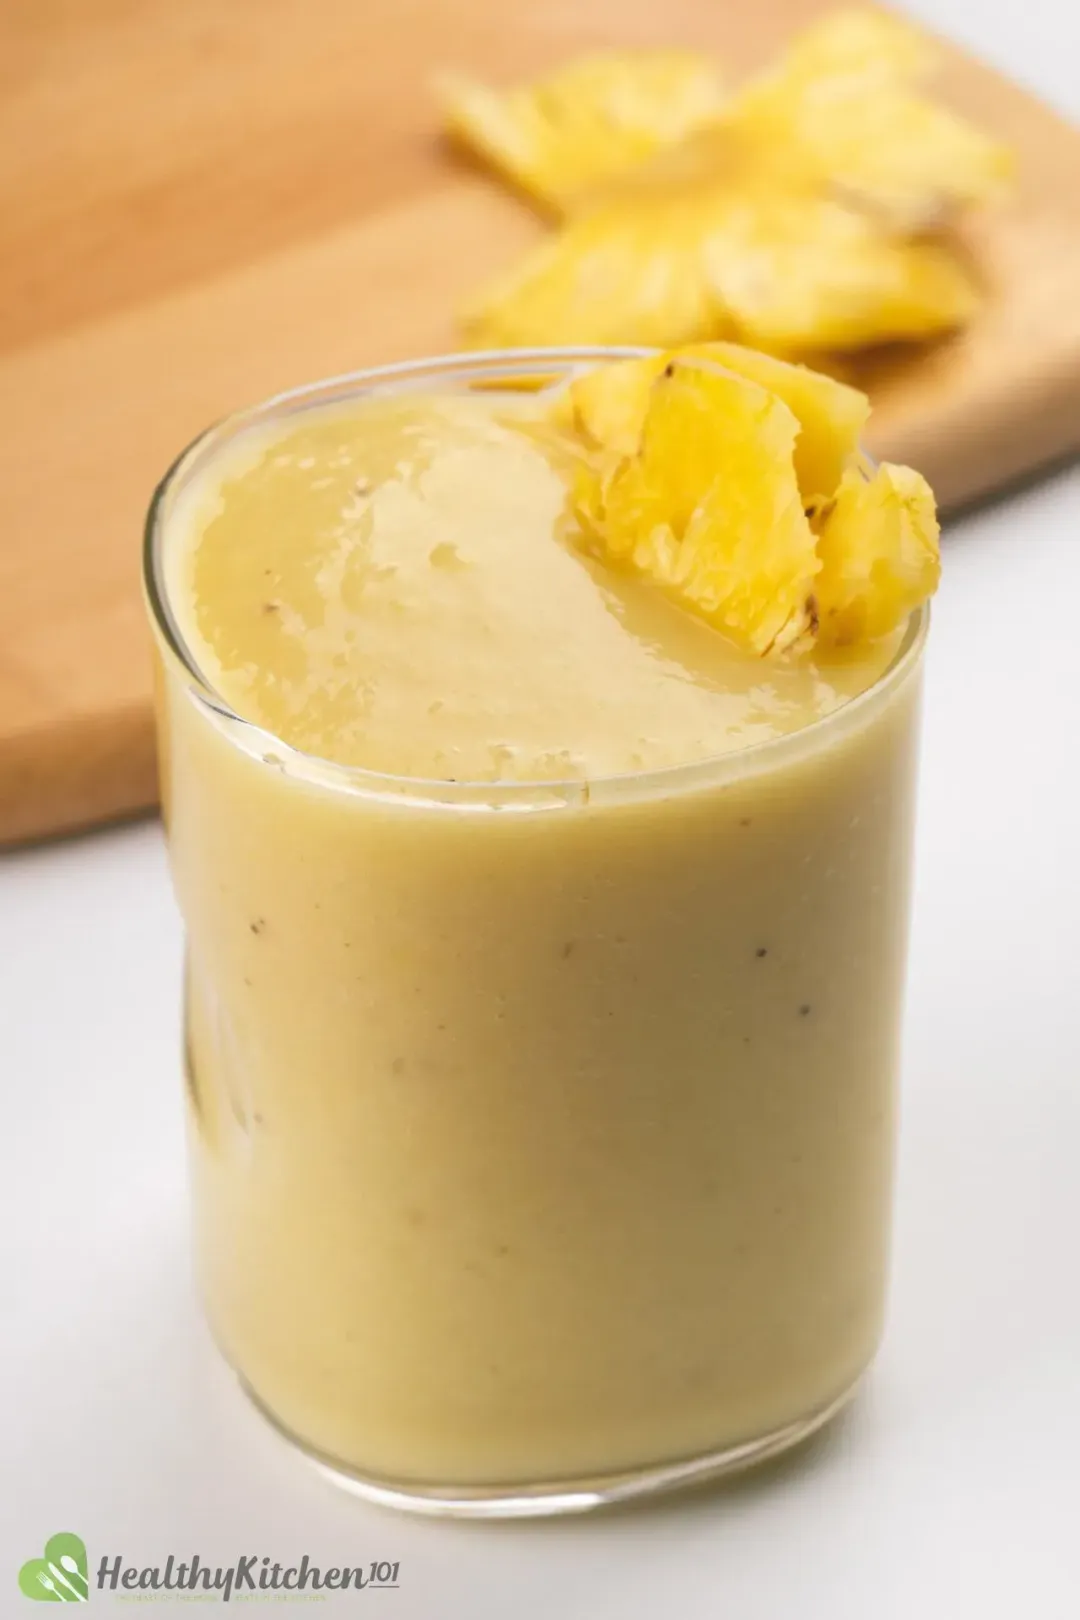 What Makes This Pineapple Smoothie Healthy